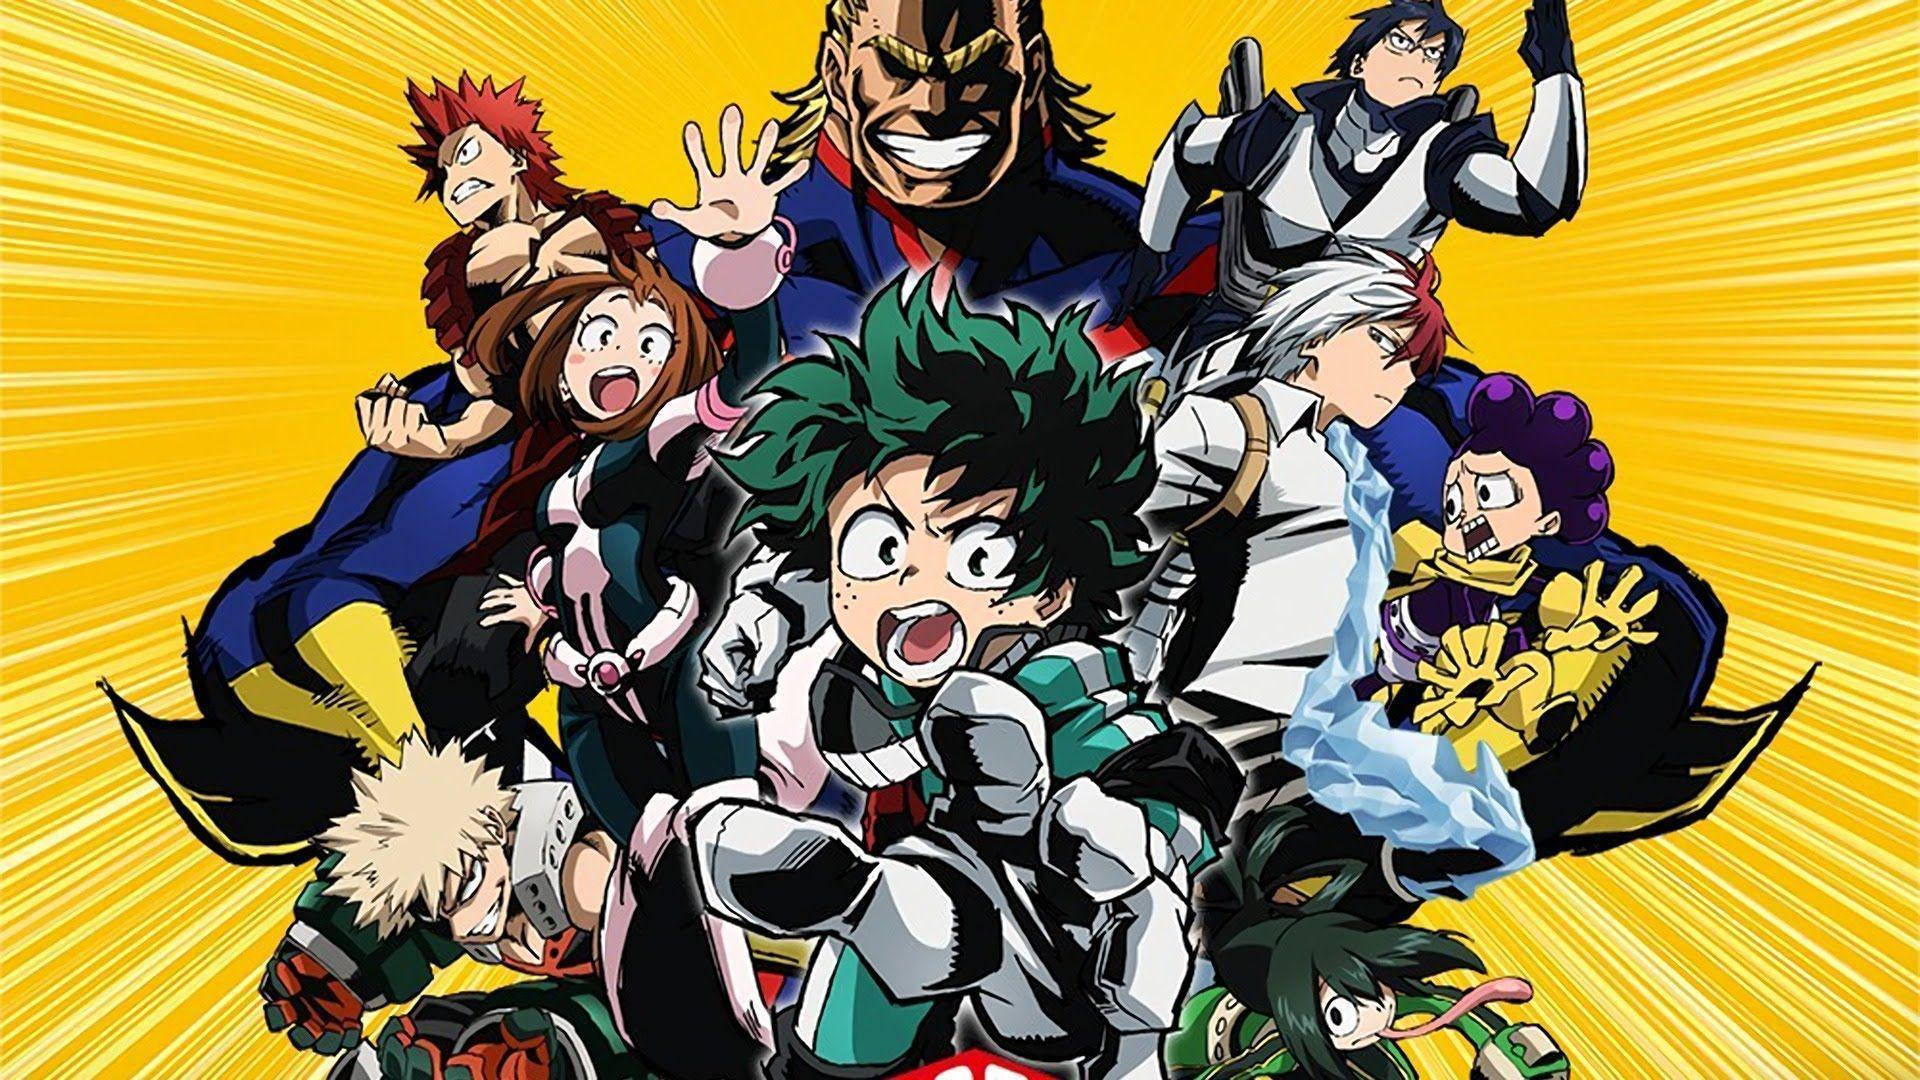 Bnha Ready-to-fight Heroes